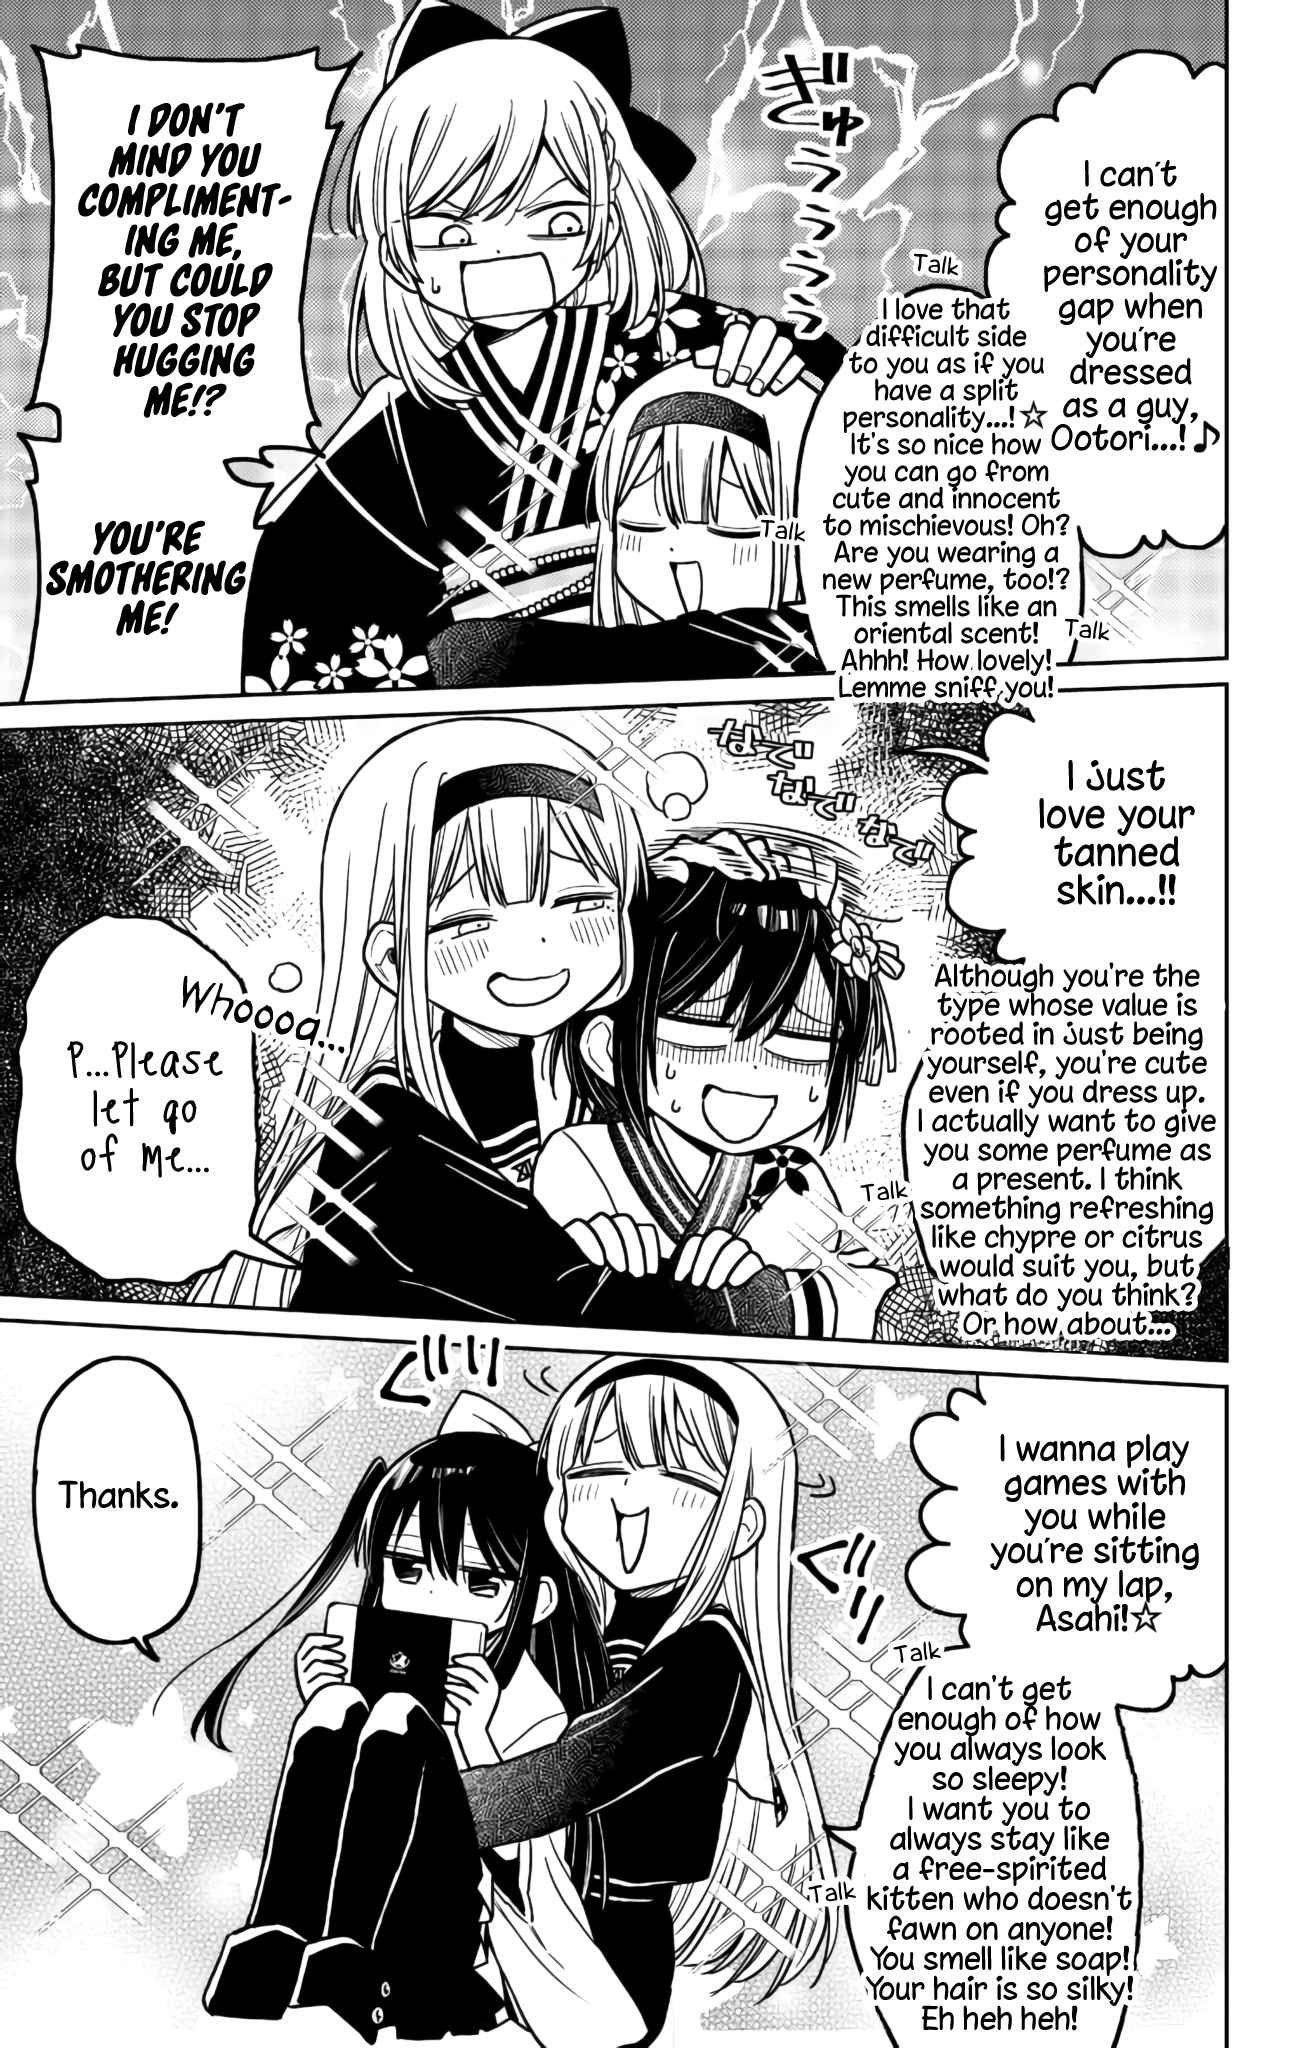 About a Guy Who's Been Destroyed From His First Love Being a Pretty Girl ♂ Ch. 4